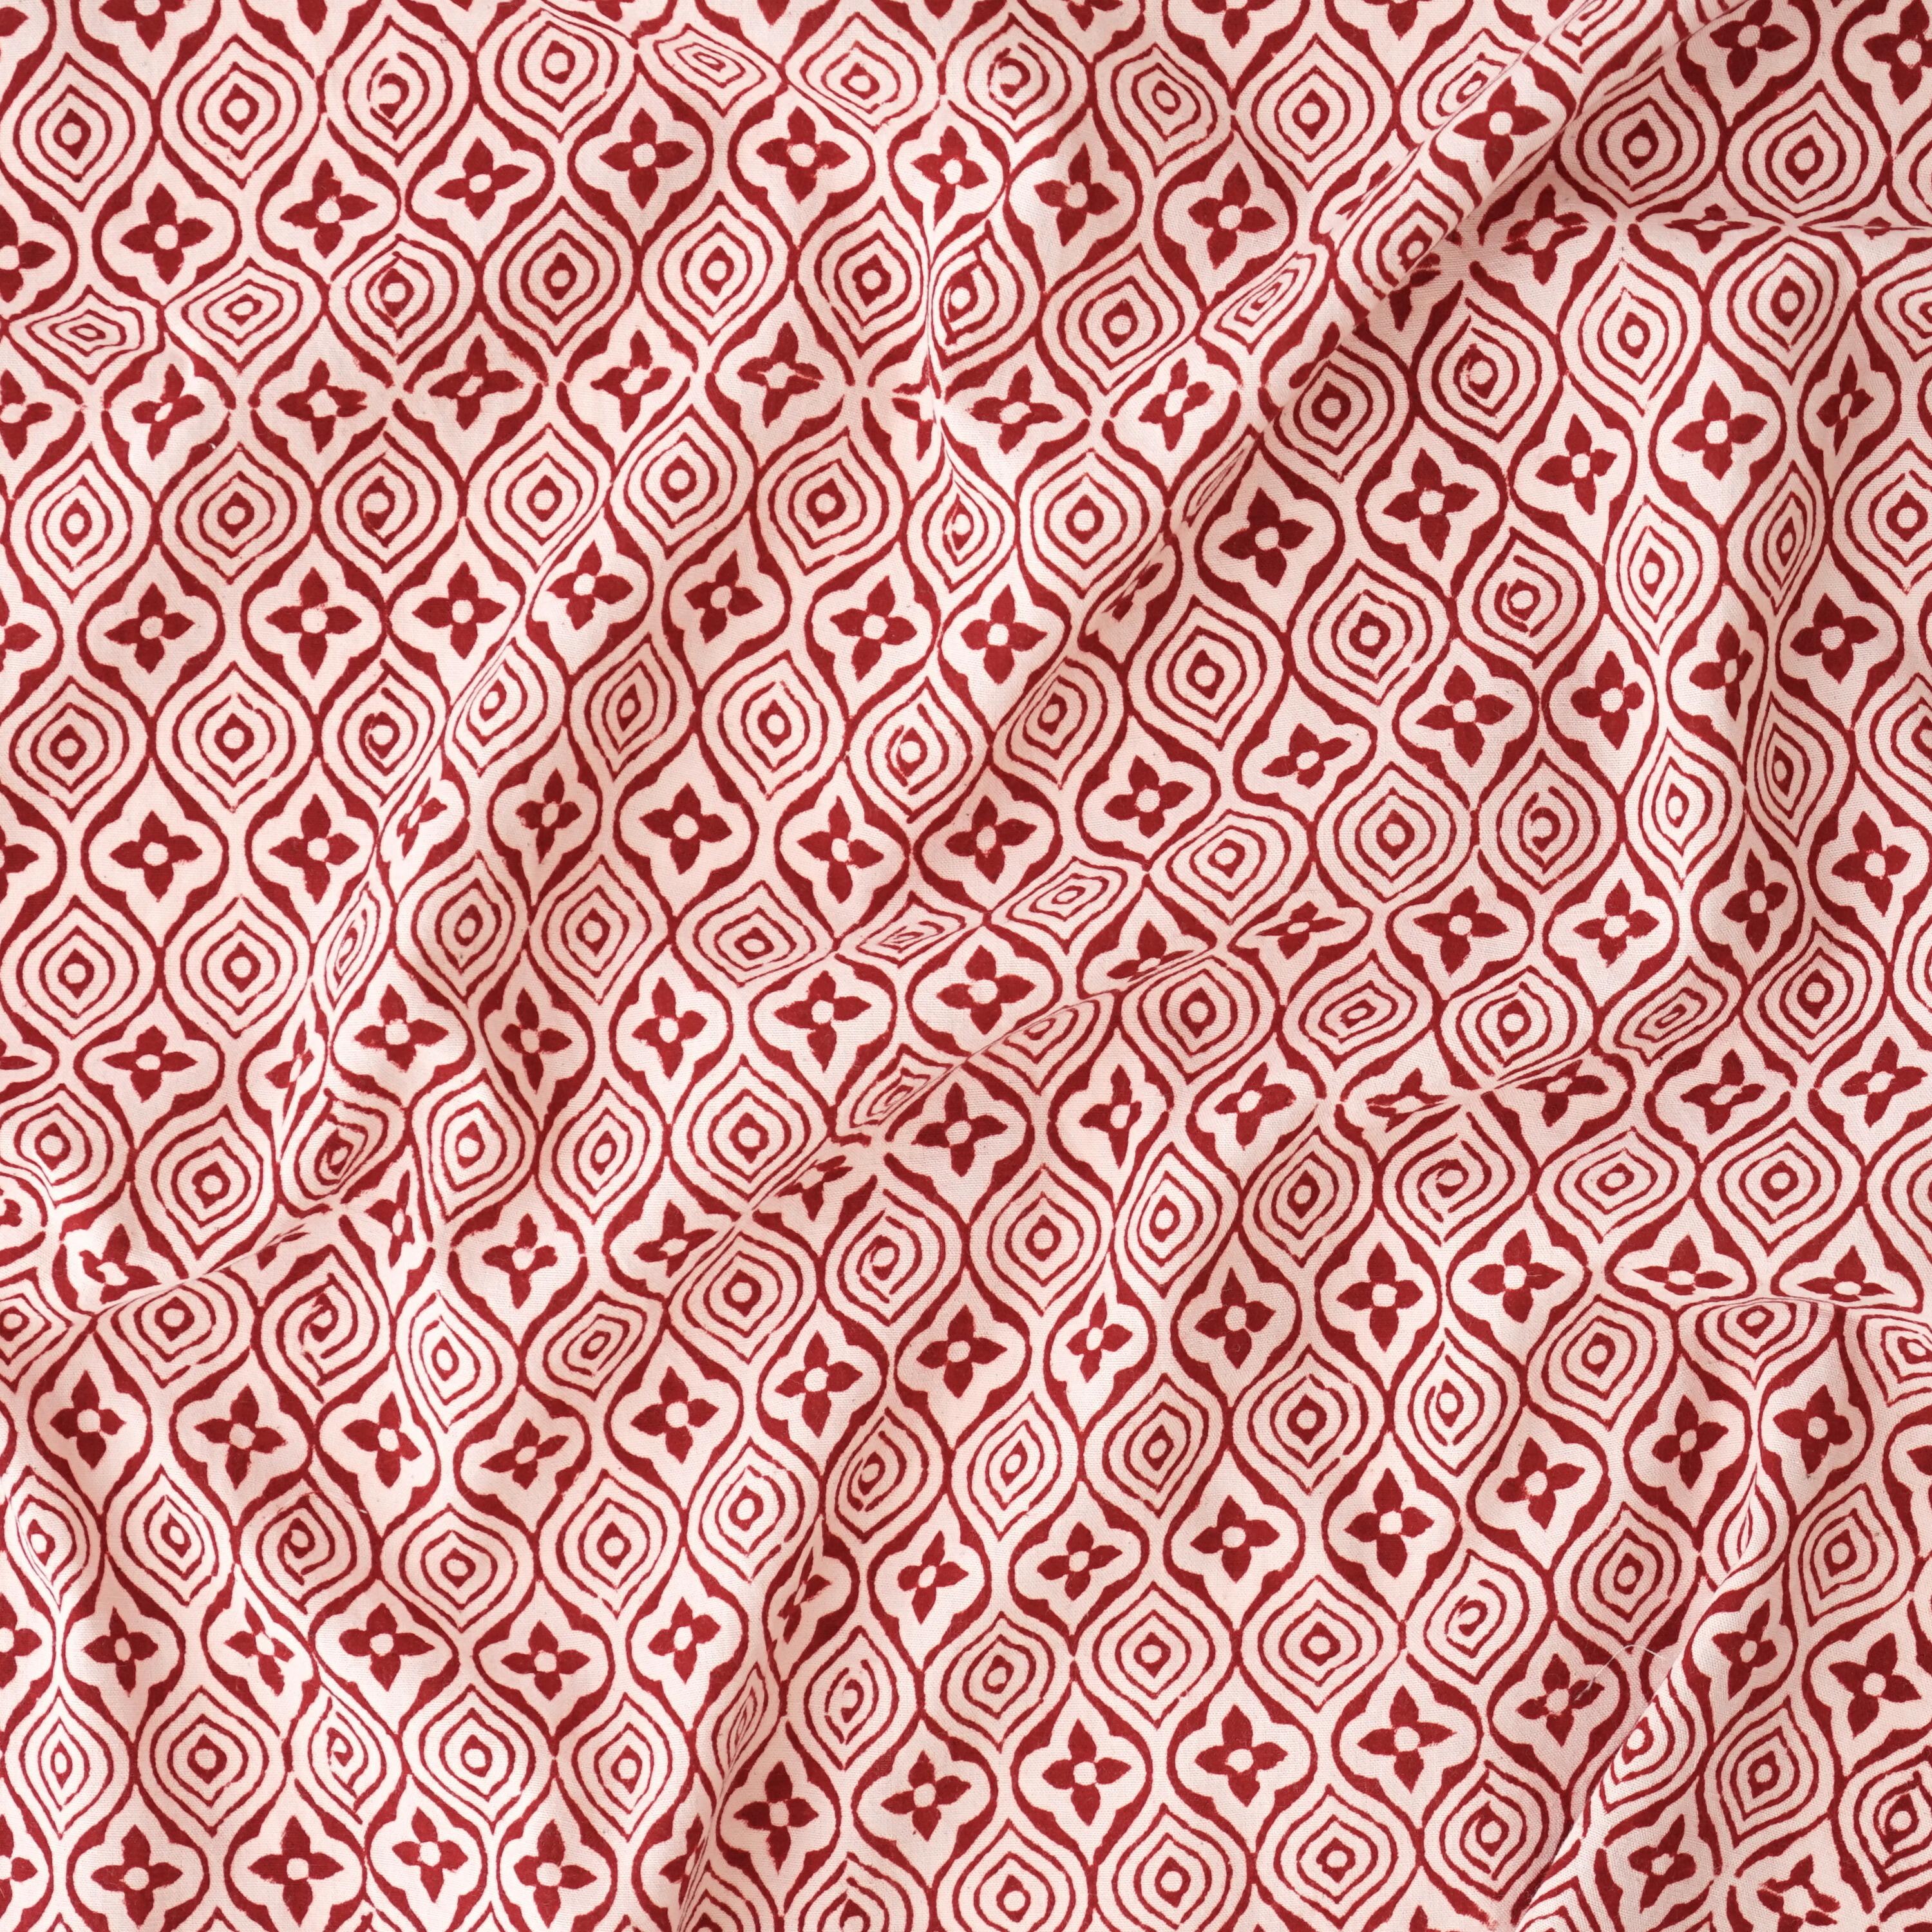 100% Block-Printed Cotton Fabric From India - Bagh Method - Alizarin Red Turkish Delight Print - Contrast